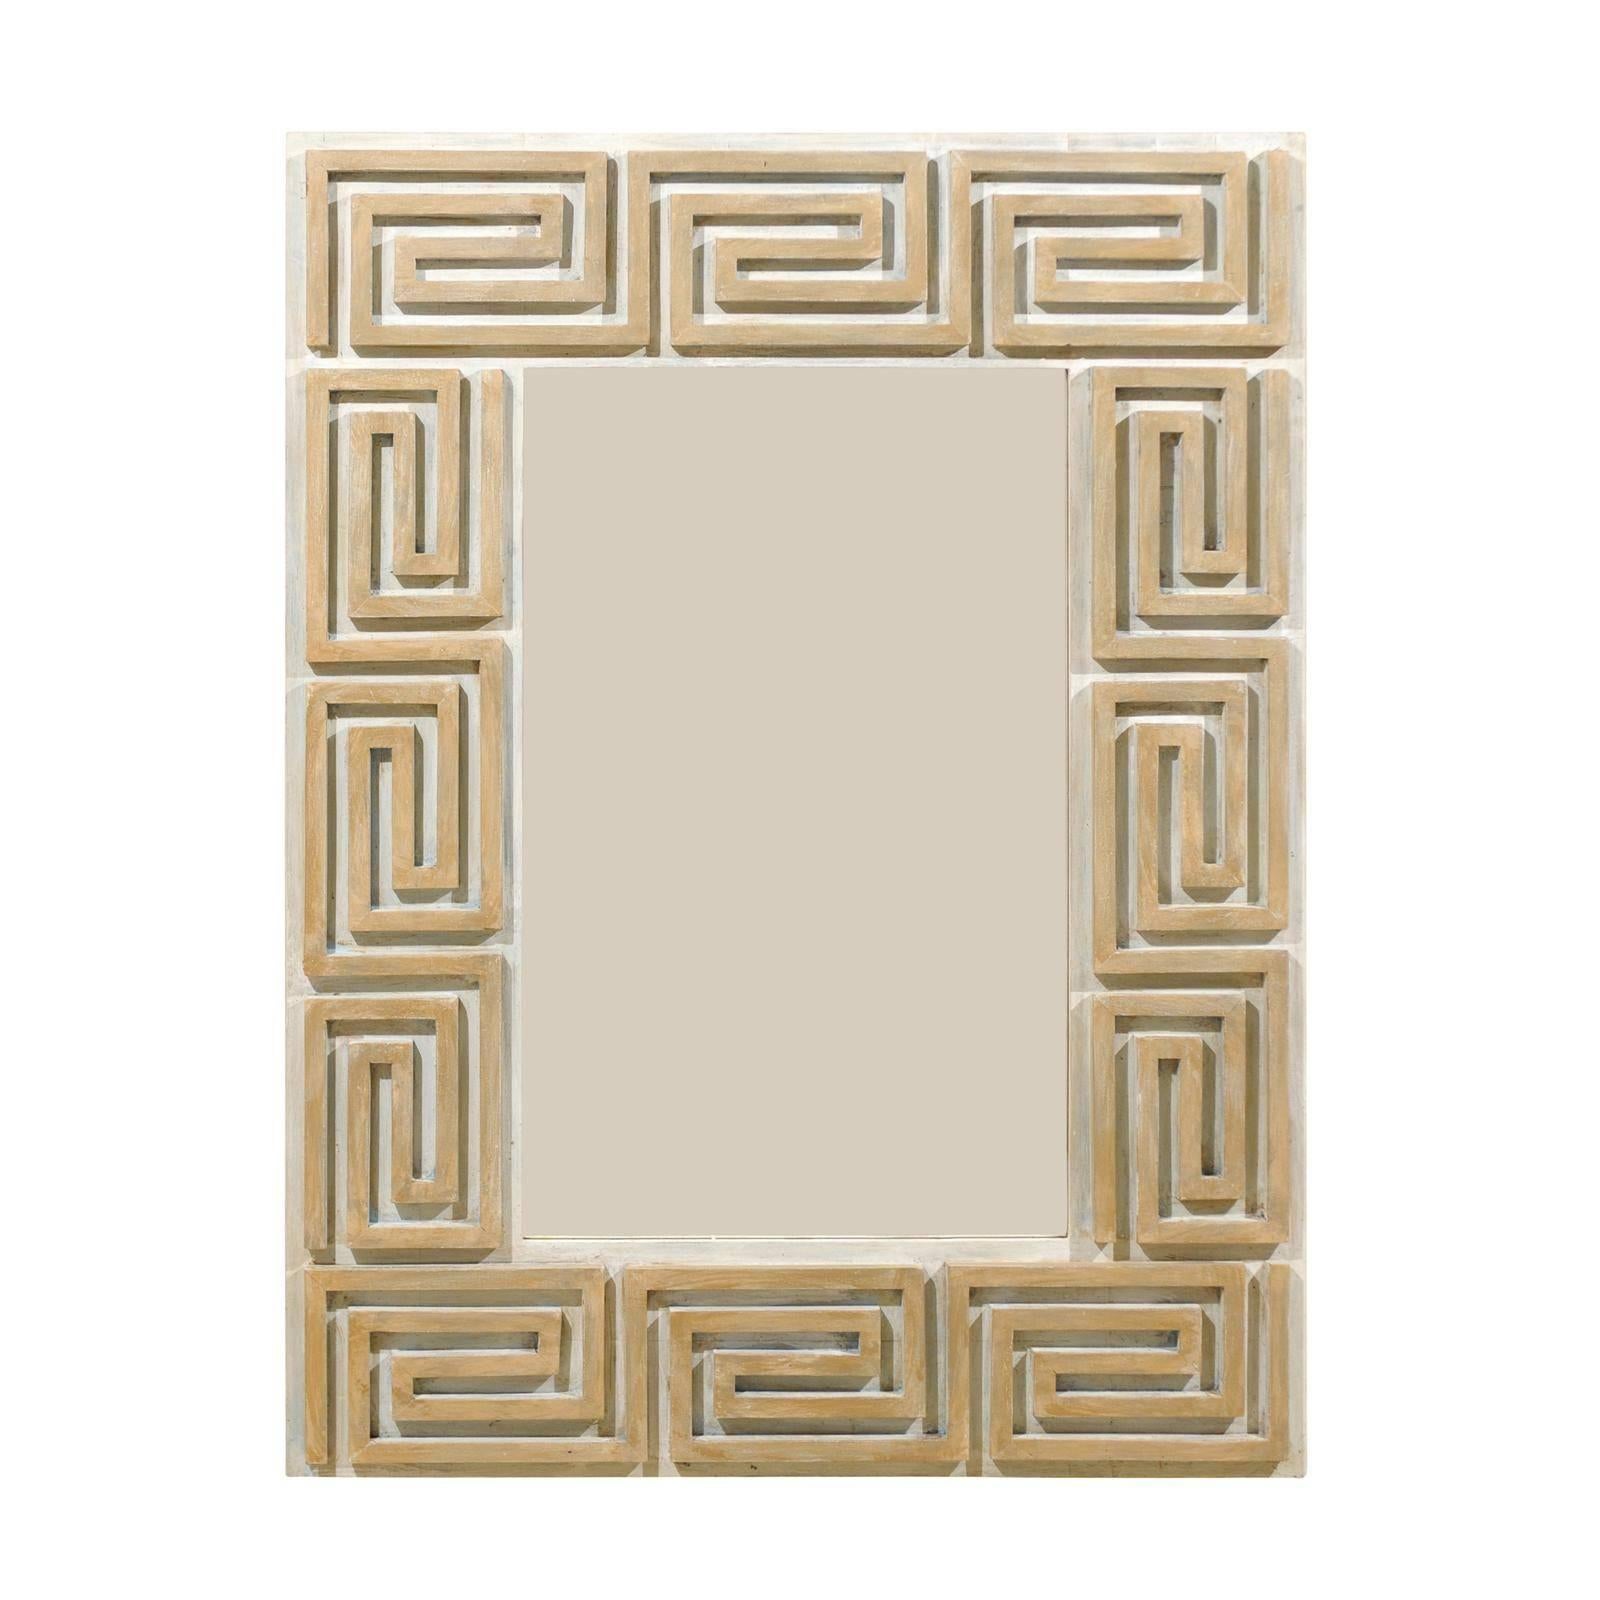 A Large Greek Key Painted Wood Mirror in Neutral Tan, Beige and Cream Color